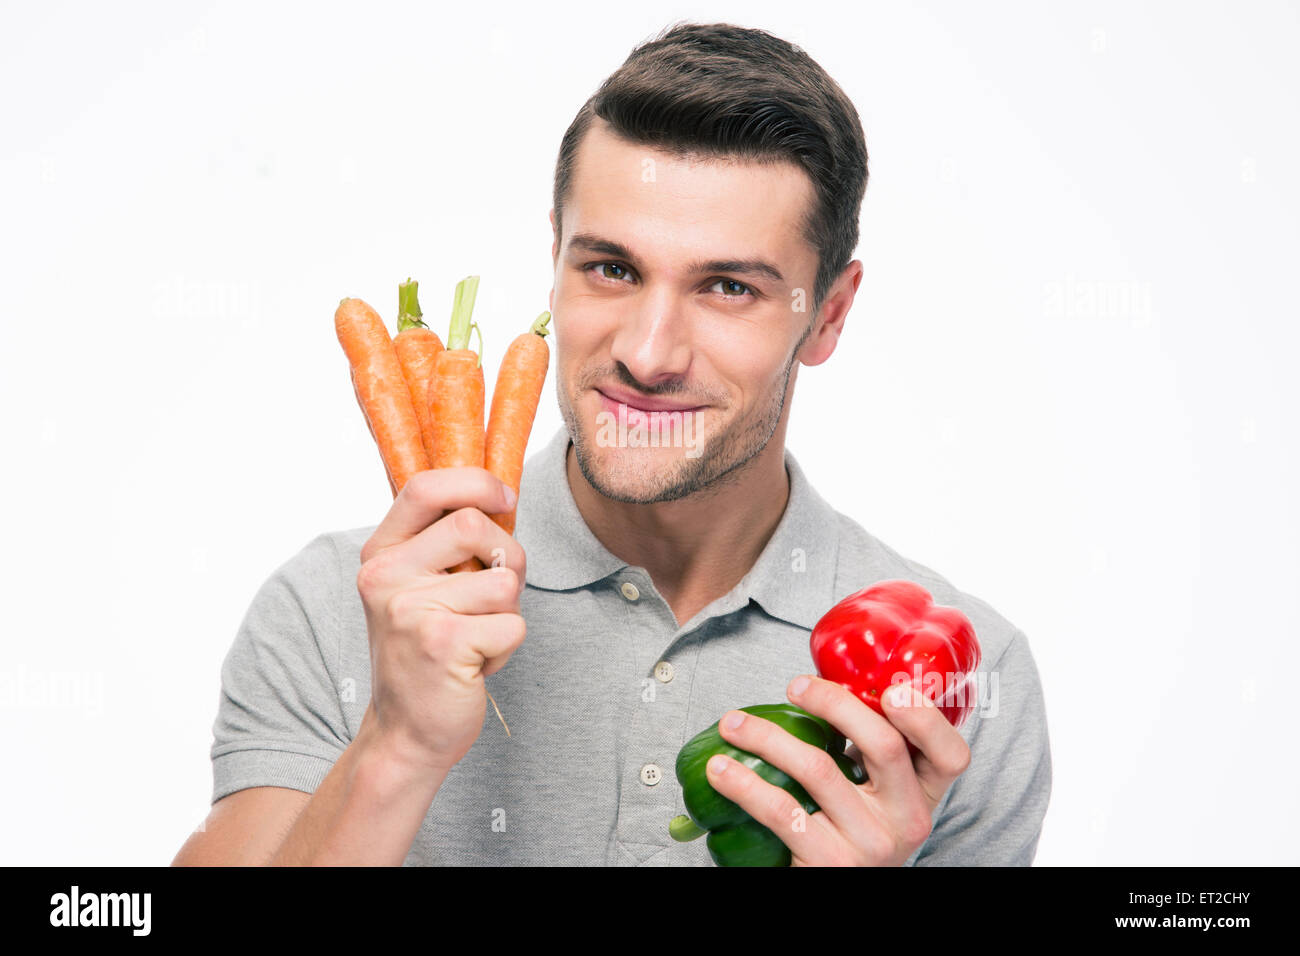 Smiling young man holding vegetables isolé sur un fond blanc. Looking at camera Banque D'Images